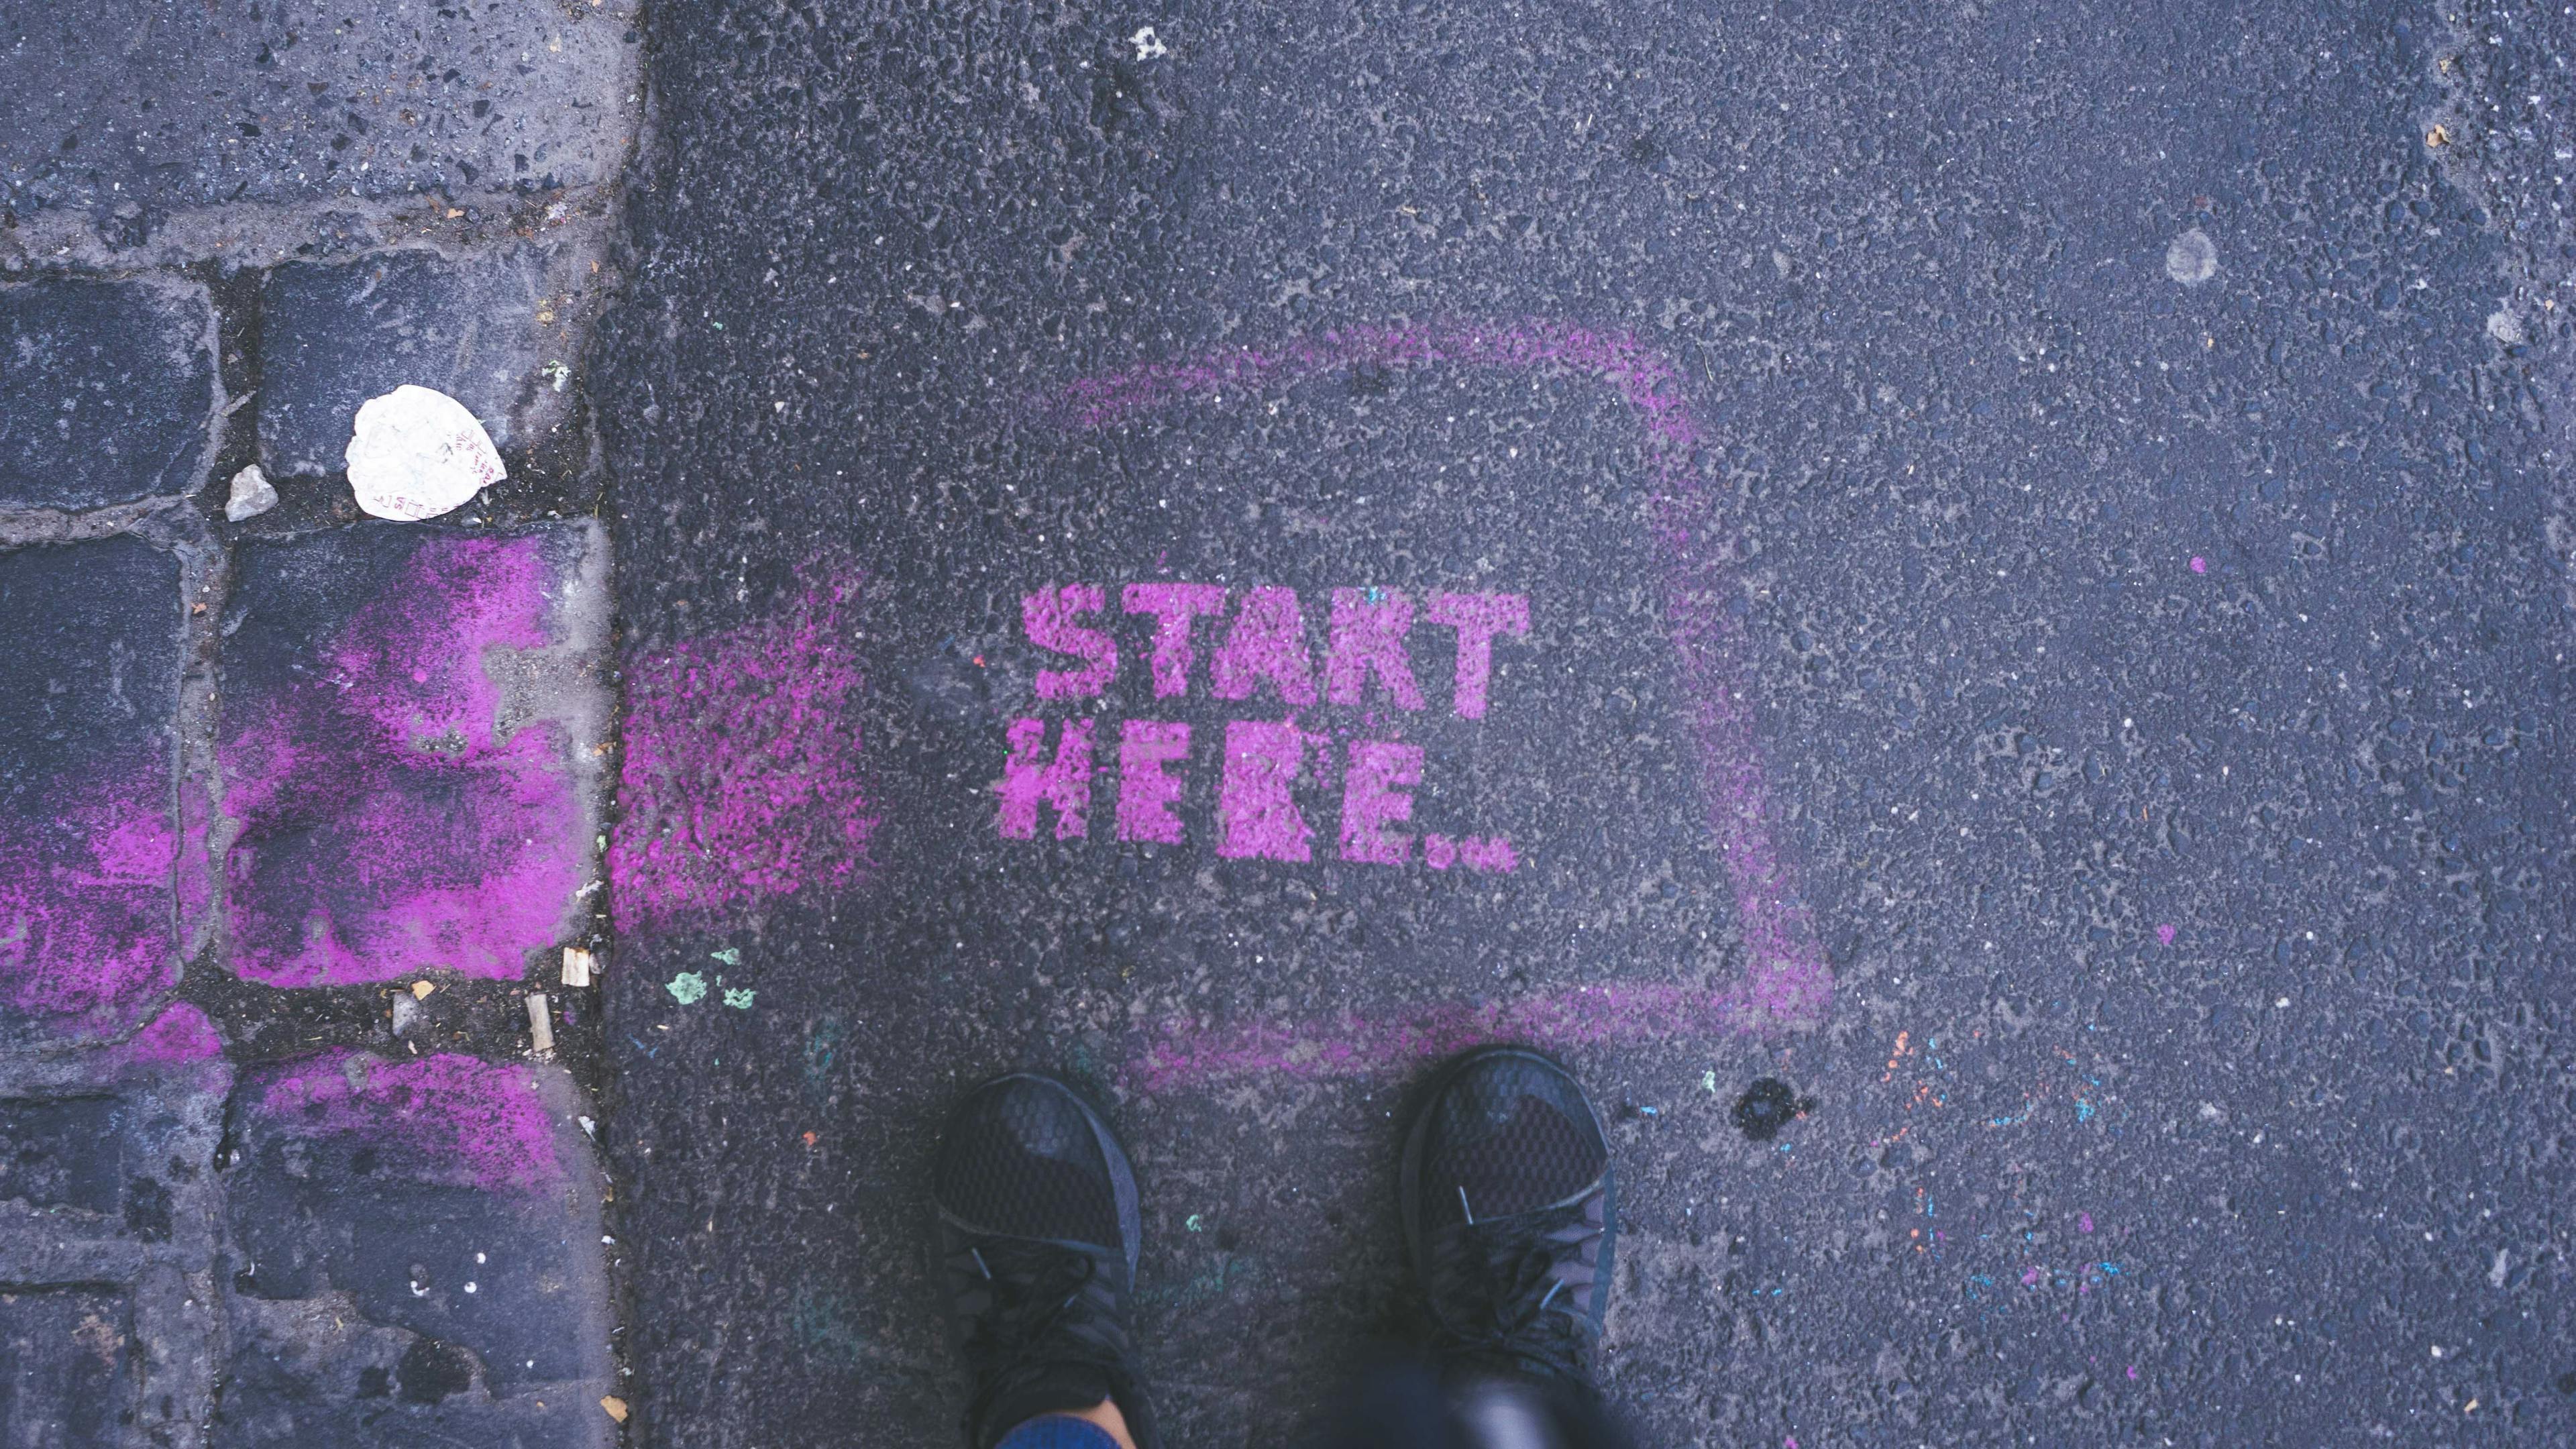 The words "start here" in purple spray paint on a street with feet near it.